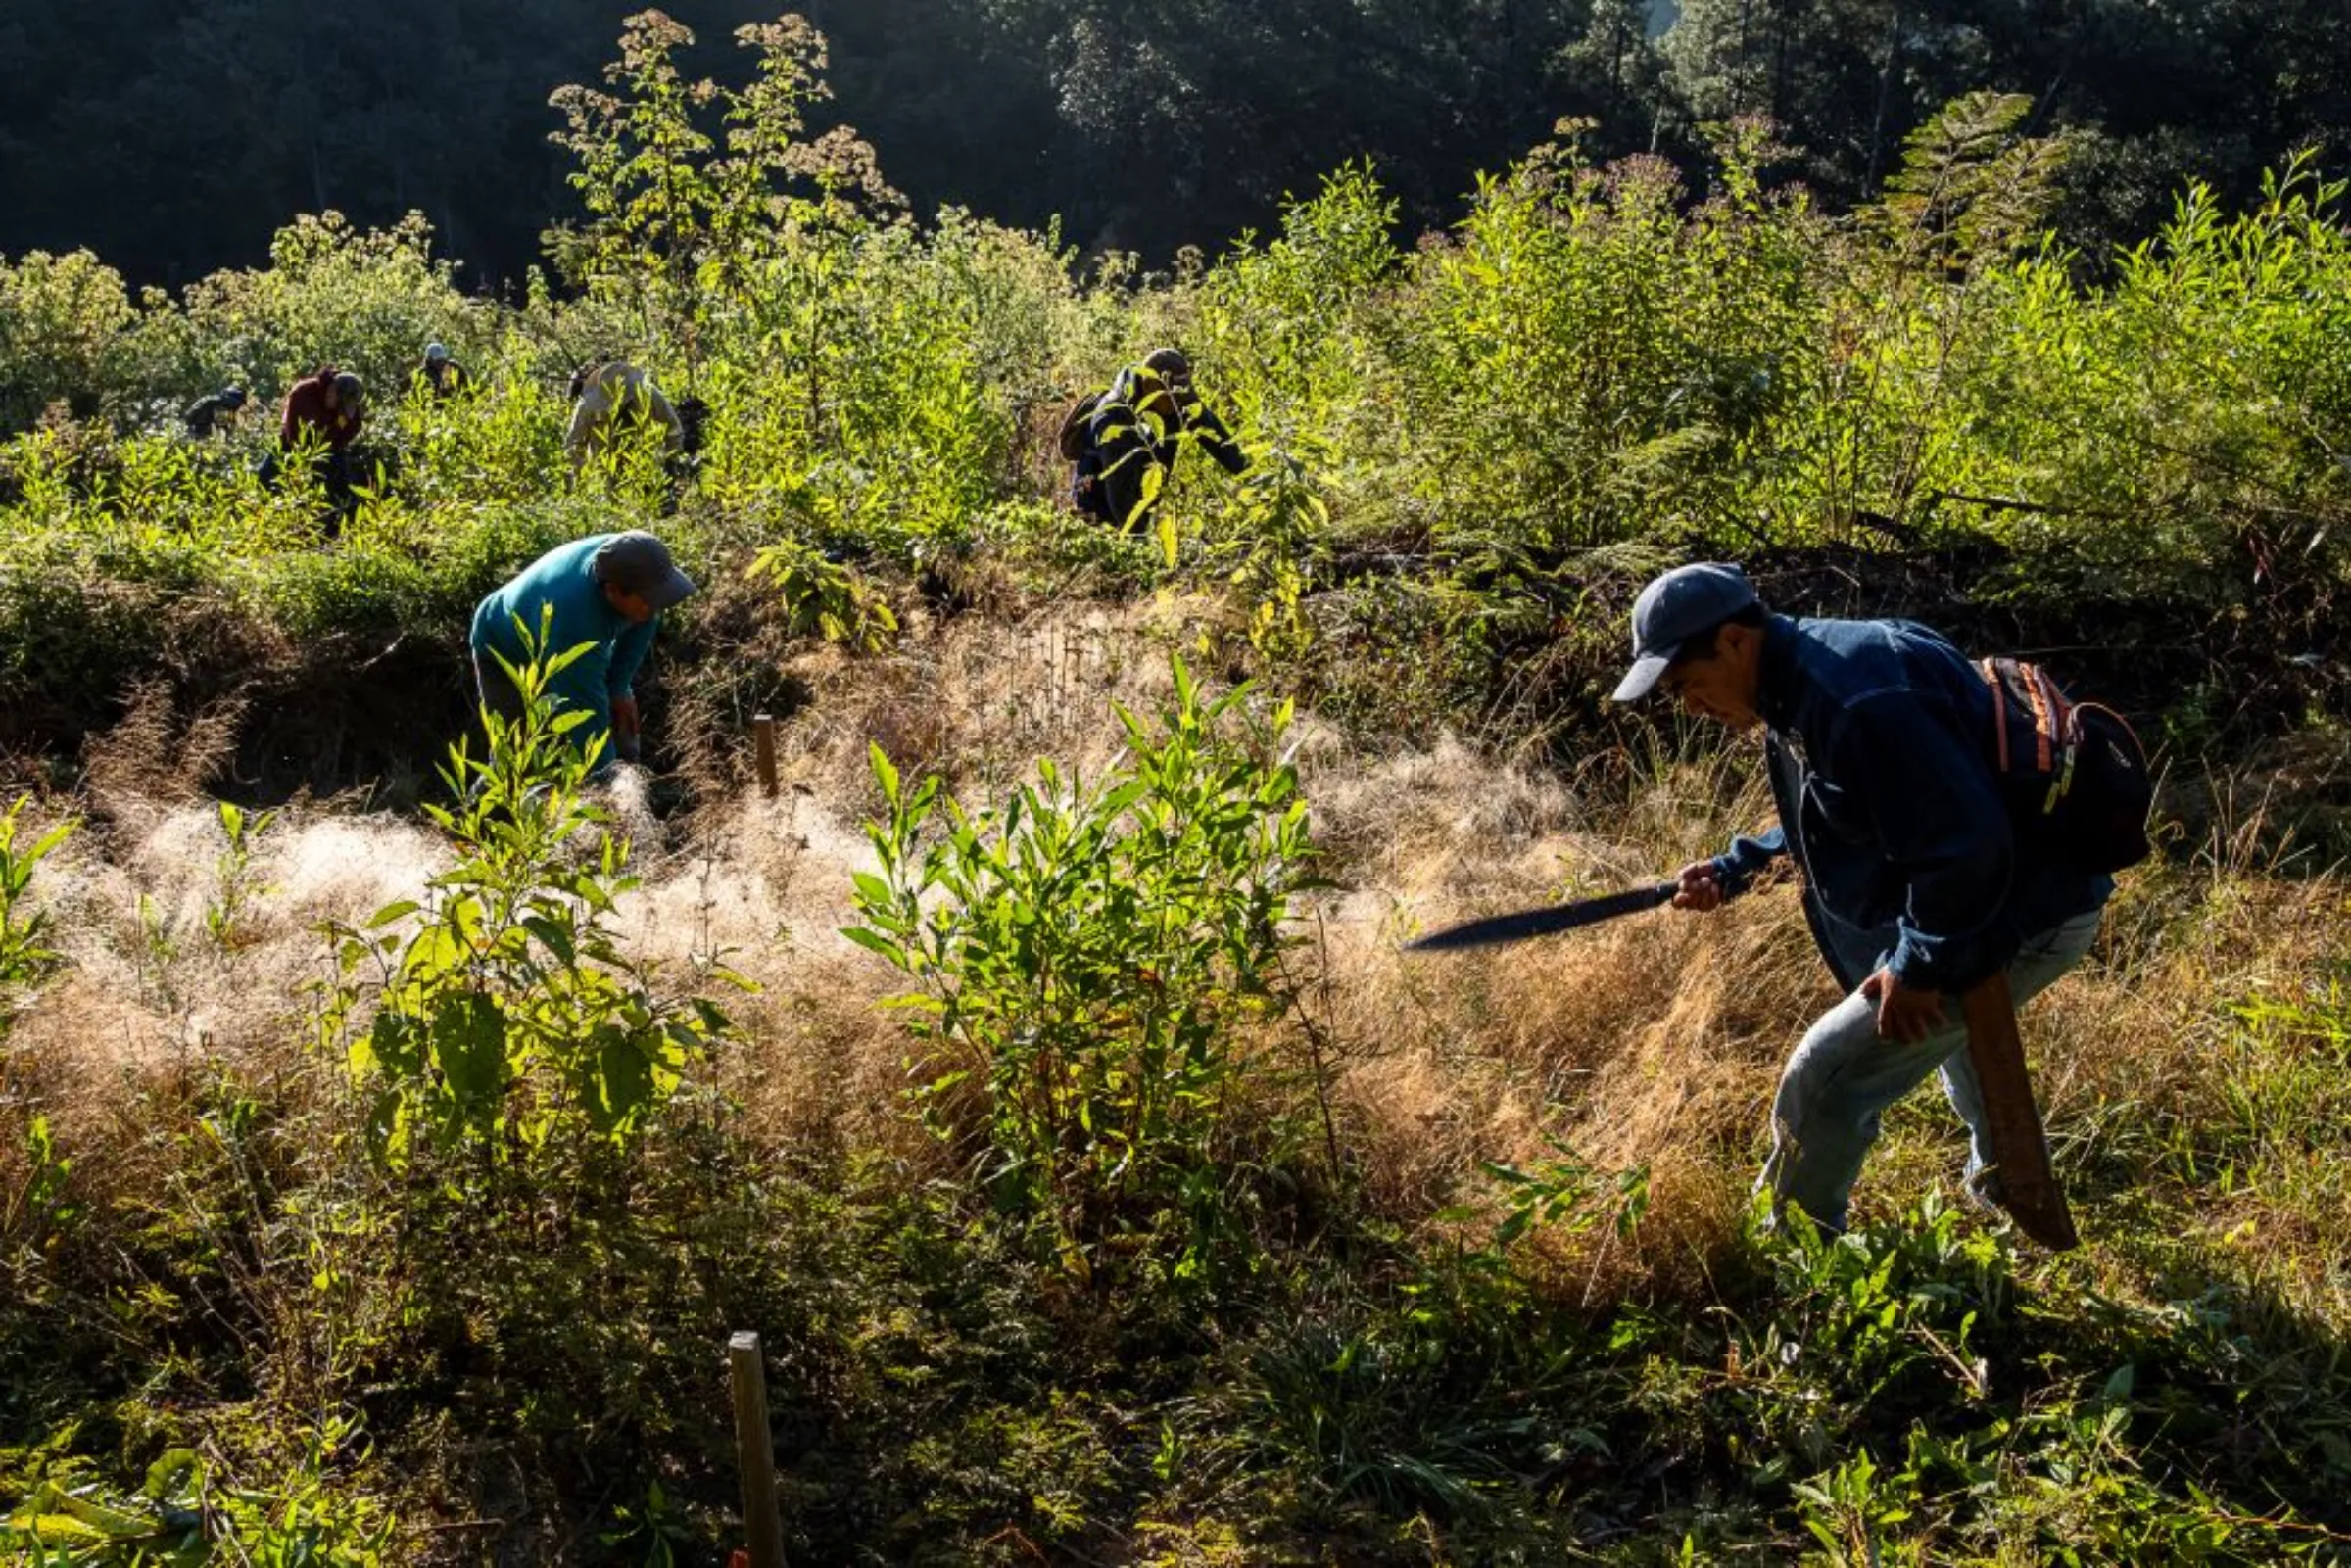 Men hold machetes to cut the plants that do not allow young pine trees to grow in the forest near Capulálpam de Mendéz, Mexico, December 11, 2022. Thomson Reuters Foundation/Noel Rojo